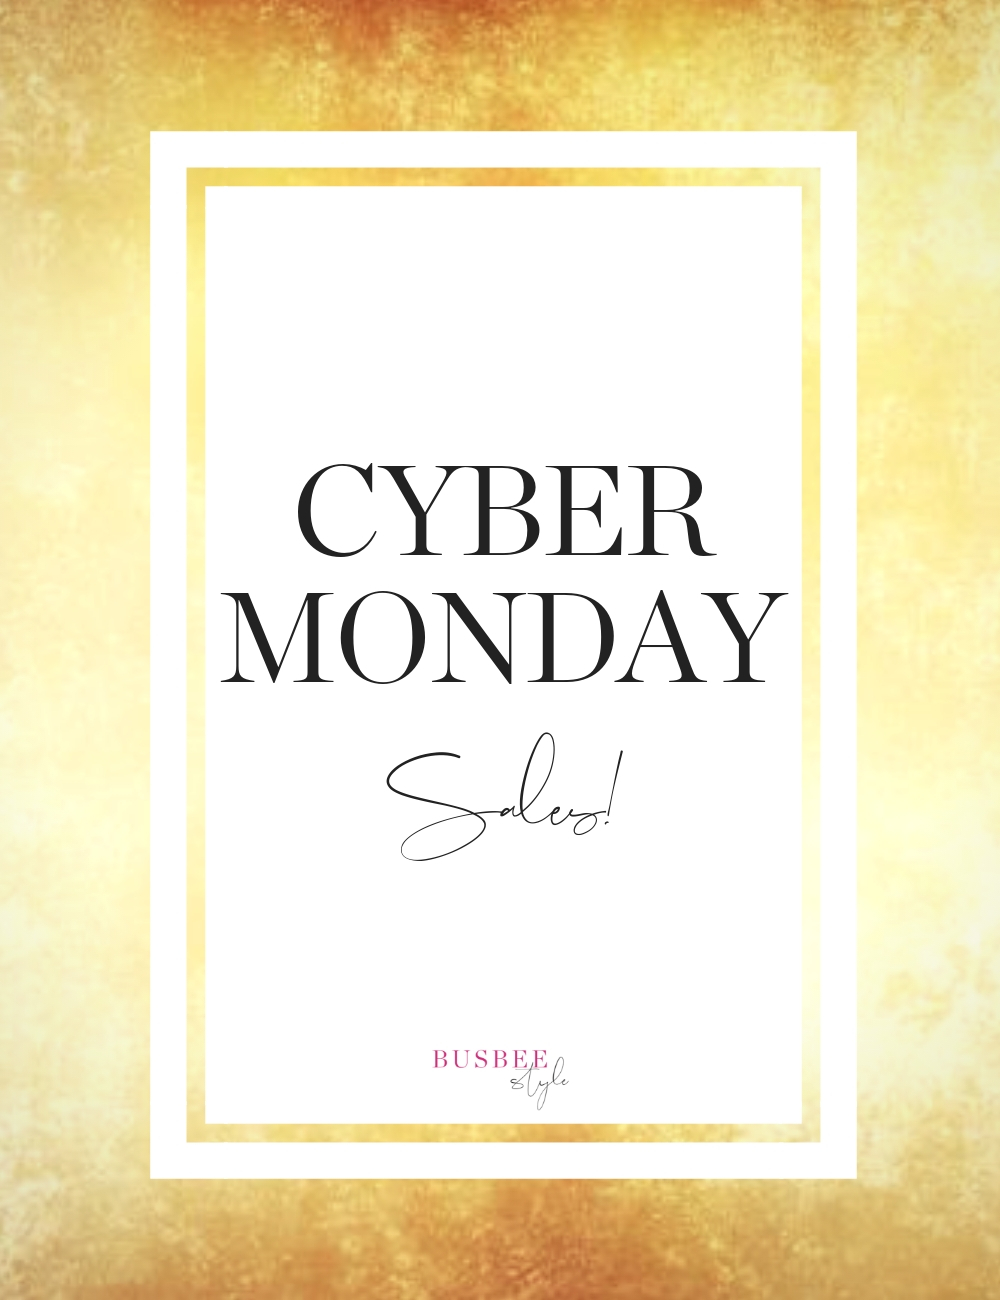 cyber monday sales, a complete list